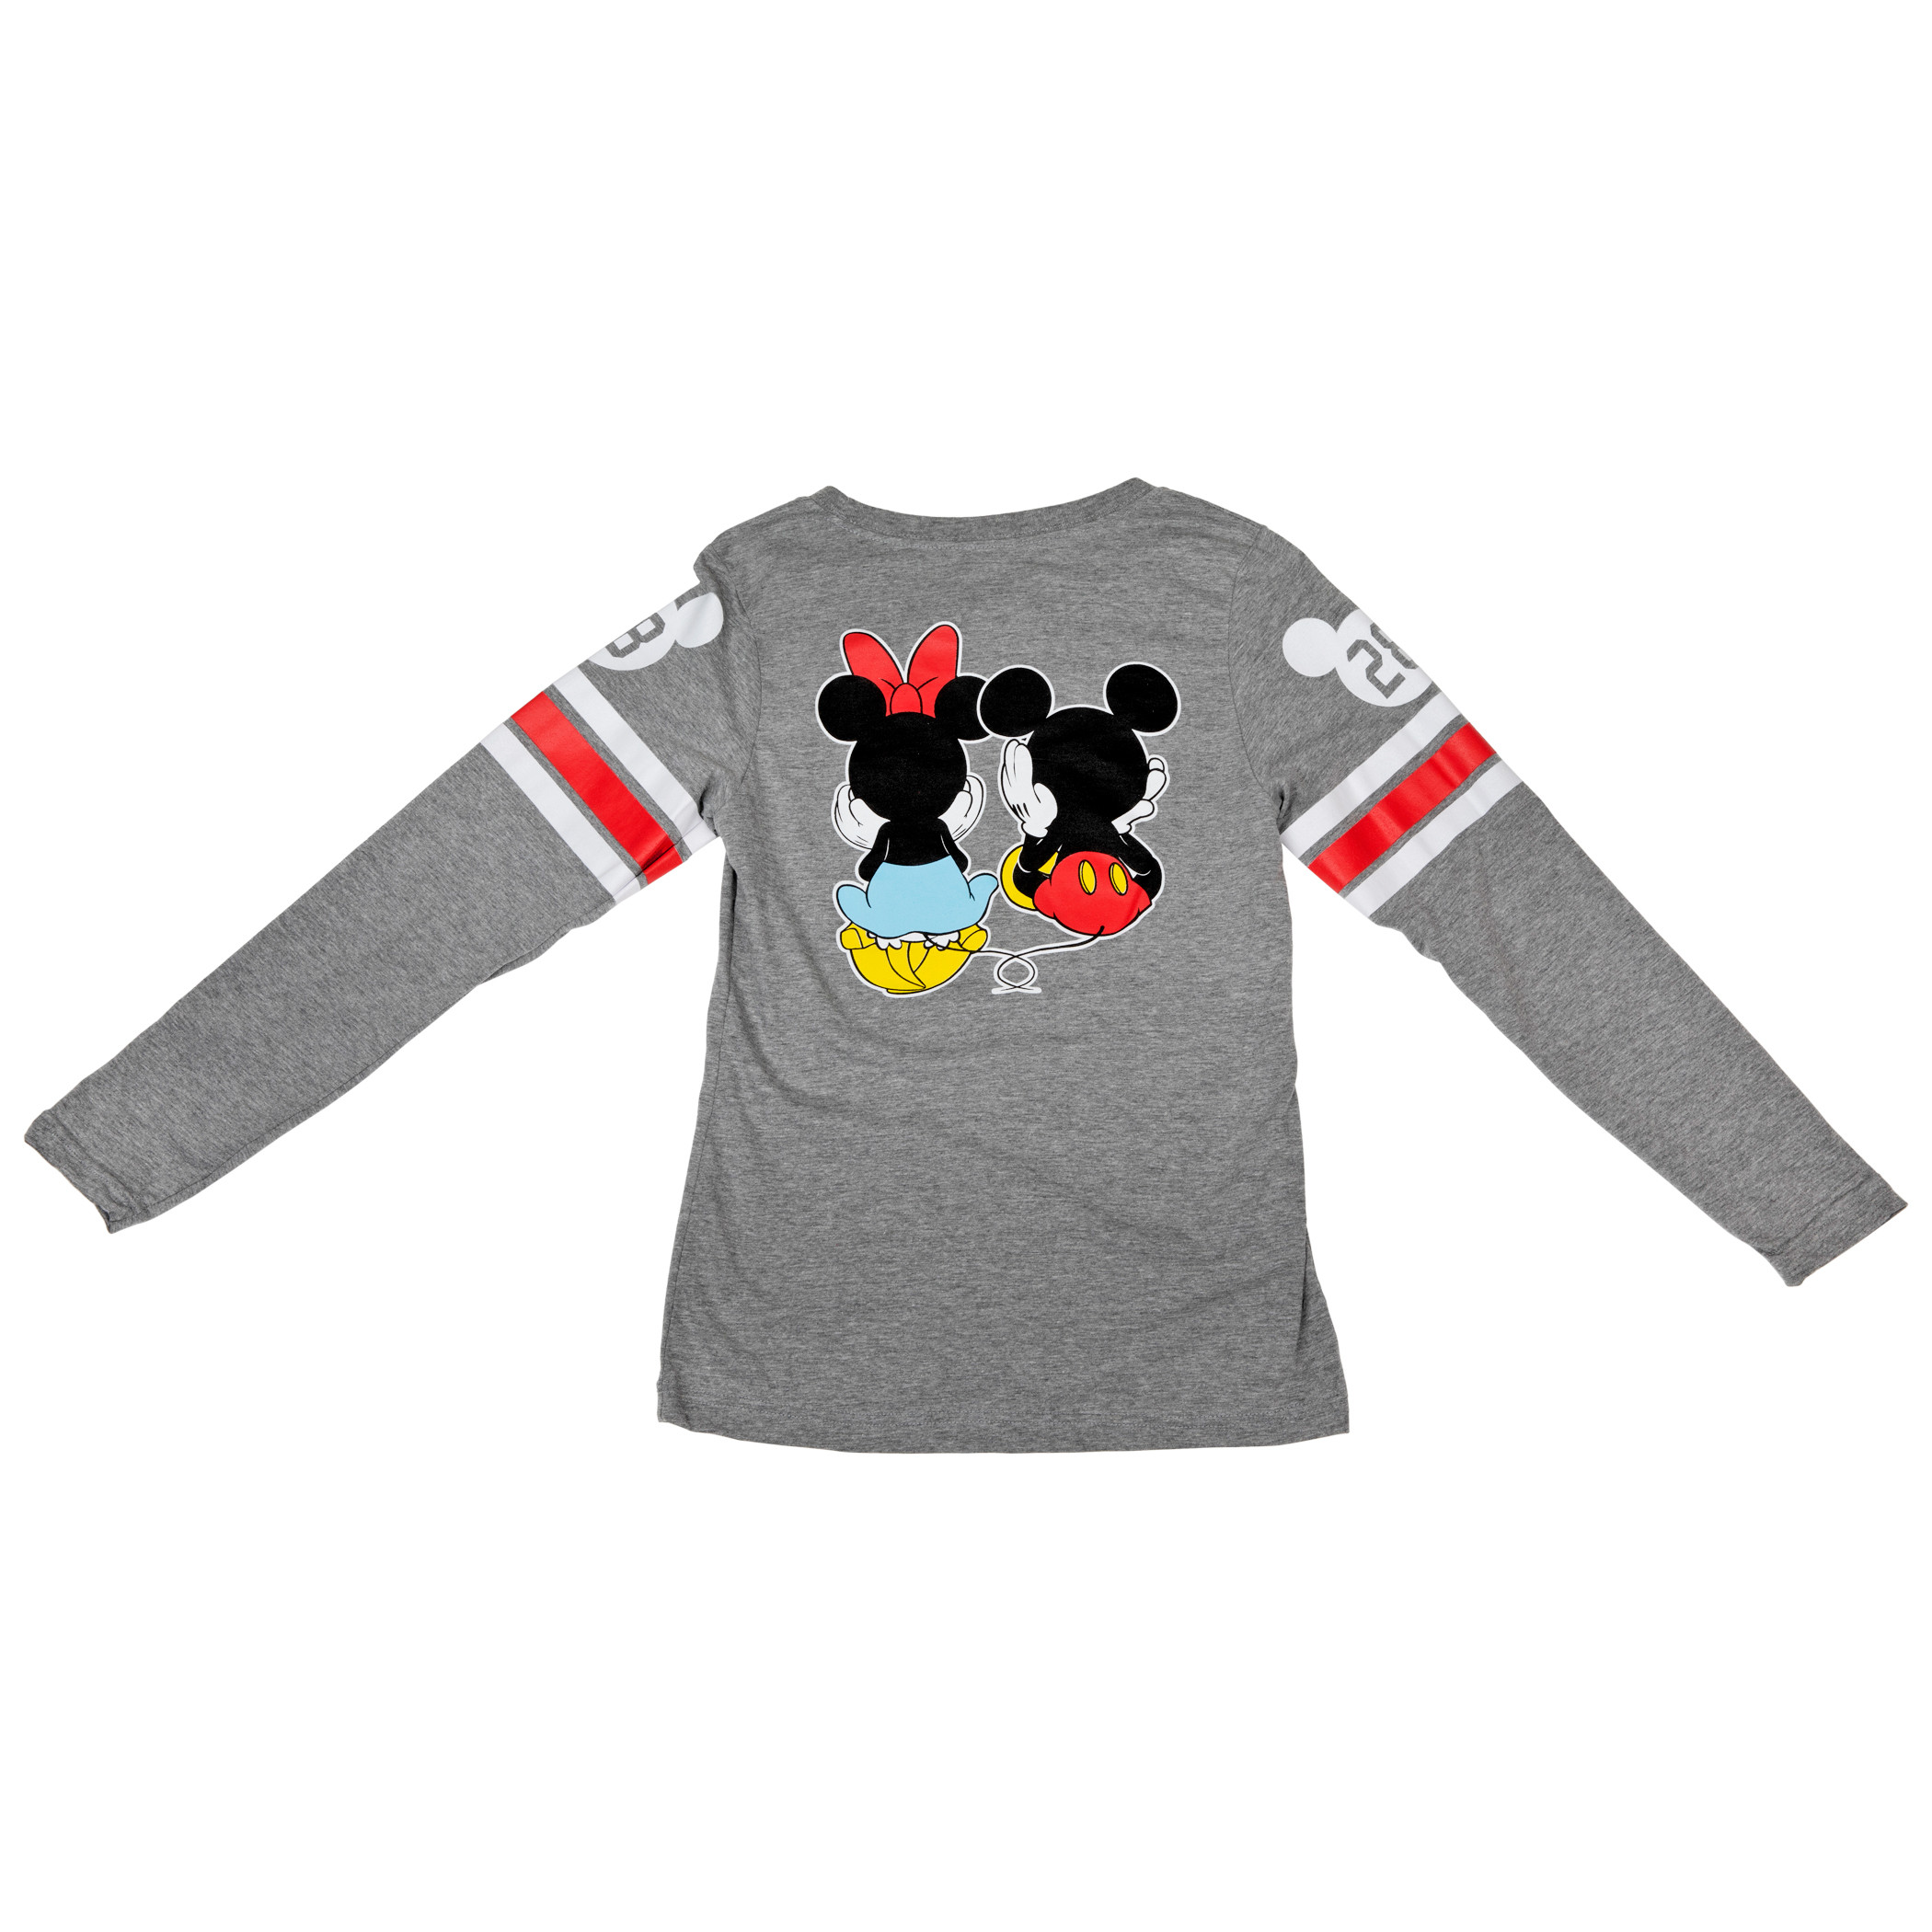 Disney Mickey & Minnie Mouse Two of a Kind Juniors Long Sleeve T-Shirt